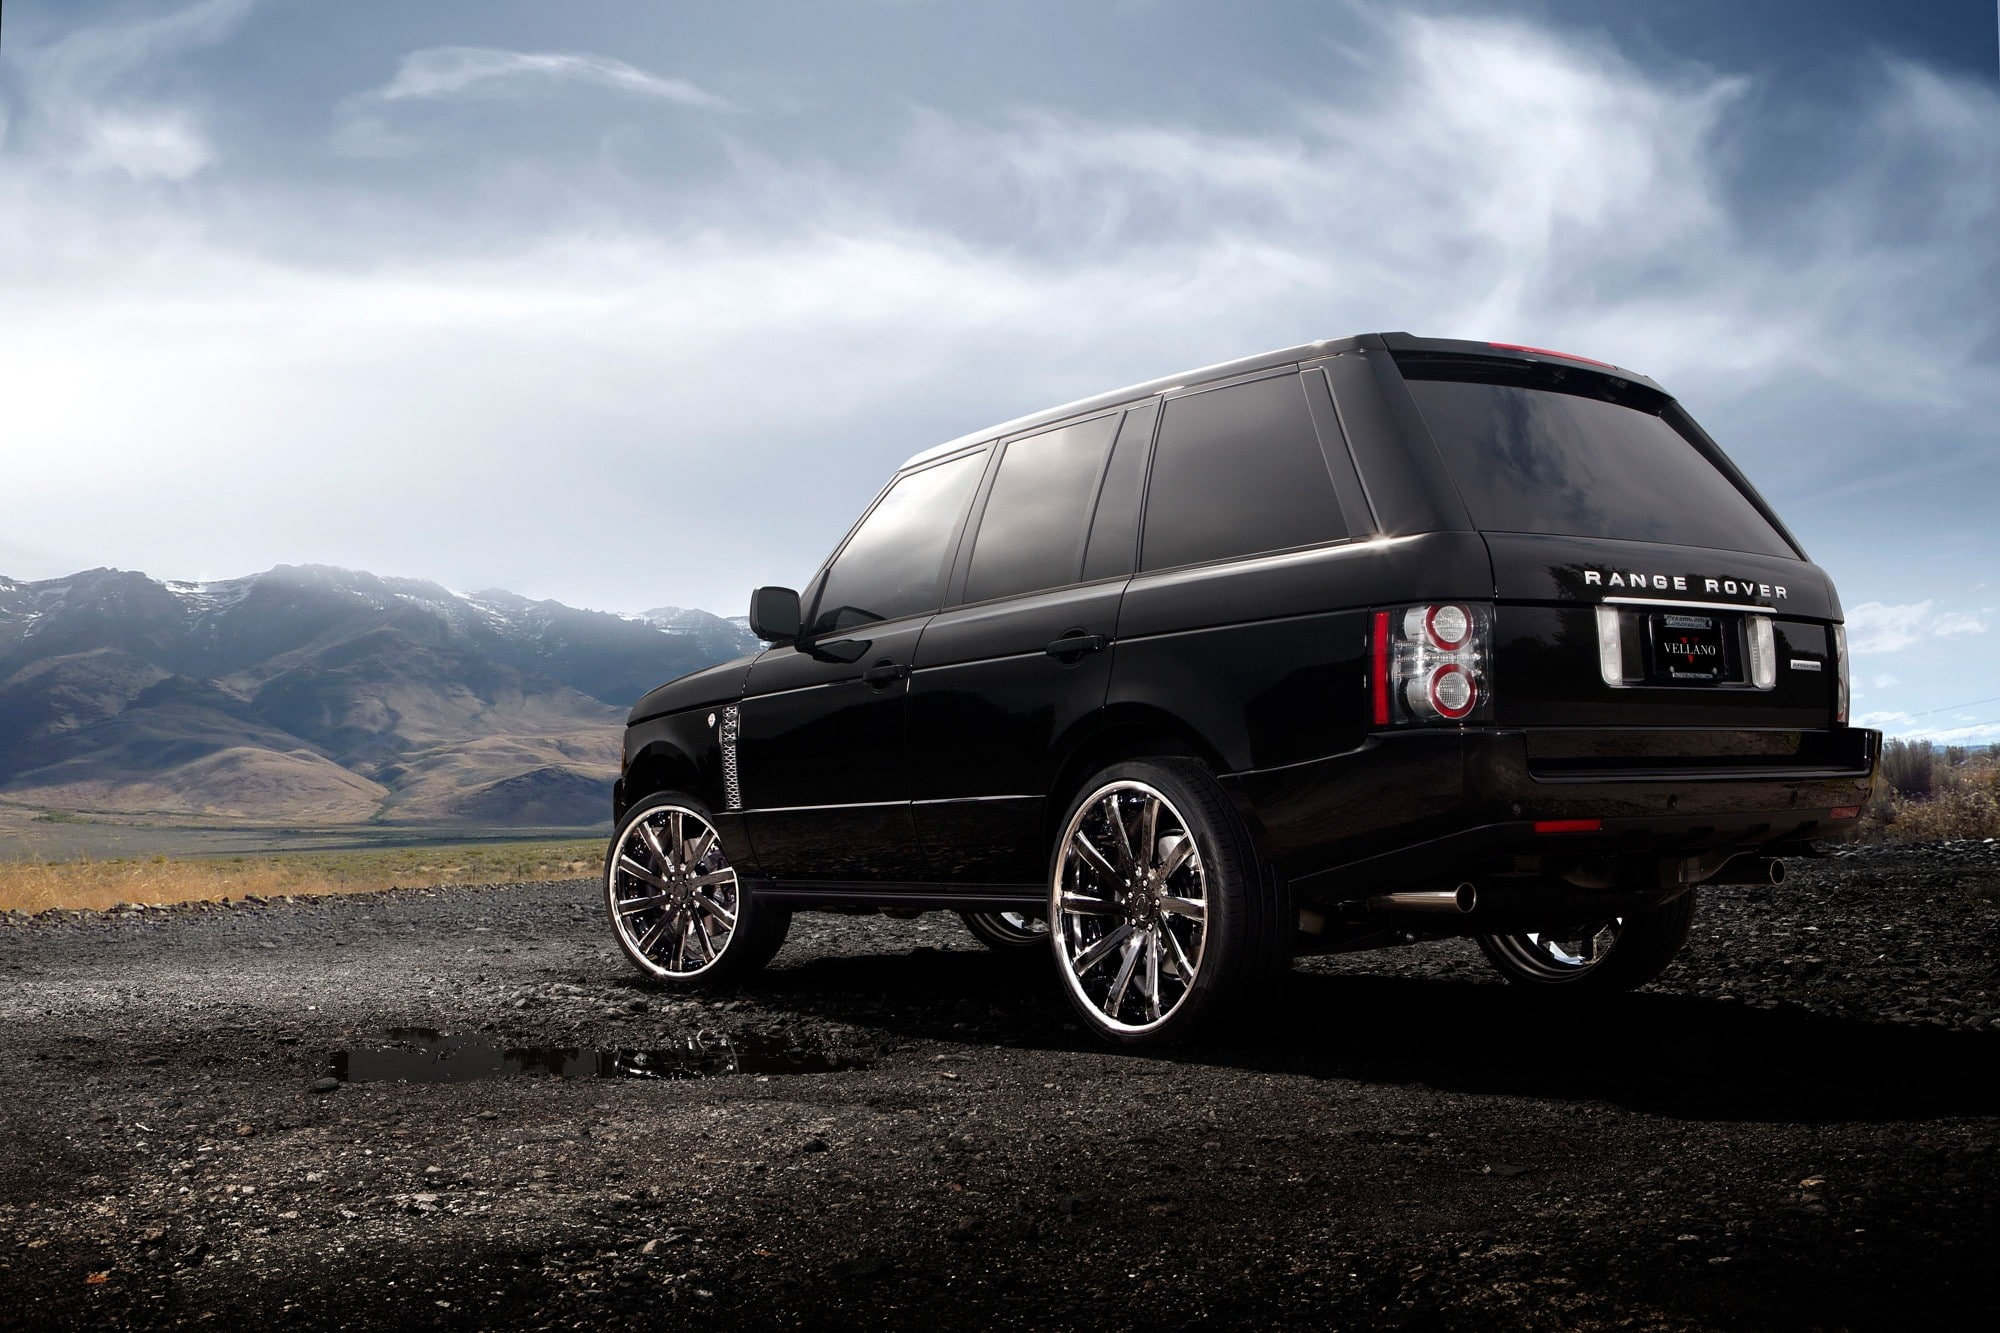 Range rover tuning, Land Rover, car, wheels, mountains, clouds